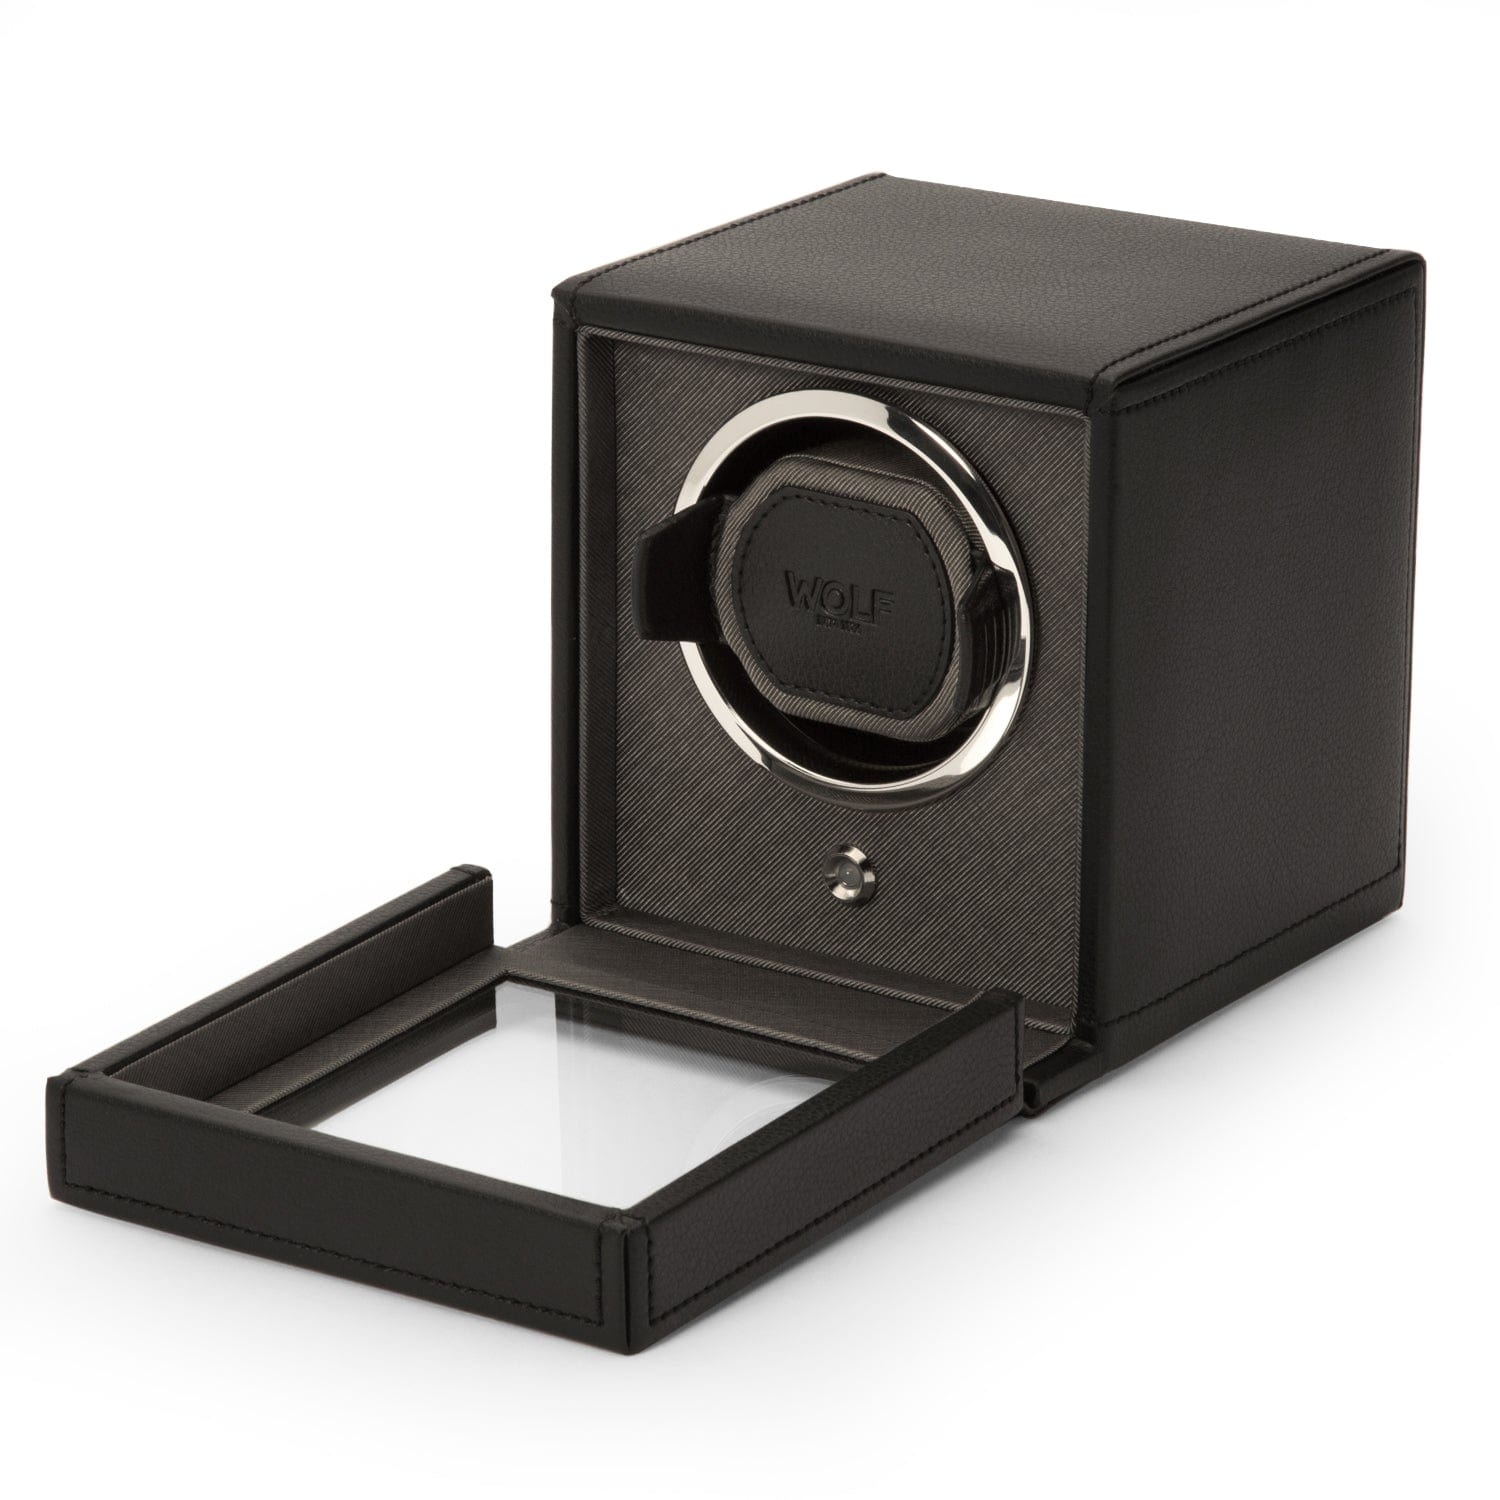 Wolf1834 Watch Winder Cub Single Watch Winder with Cover-Black